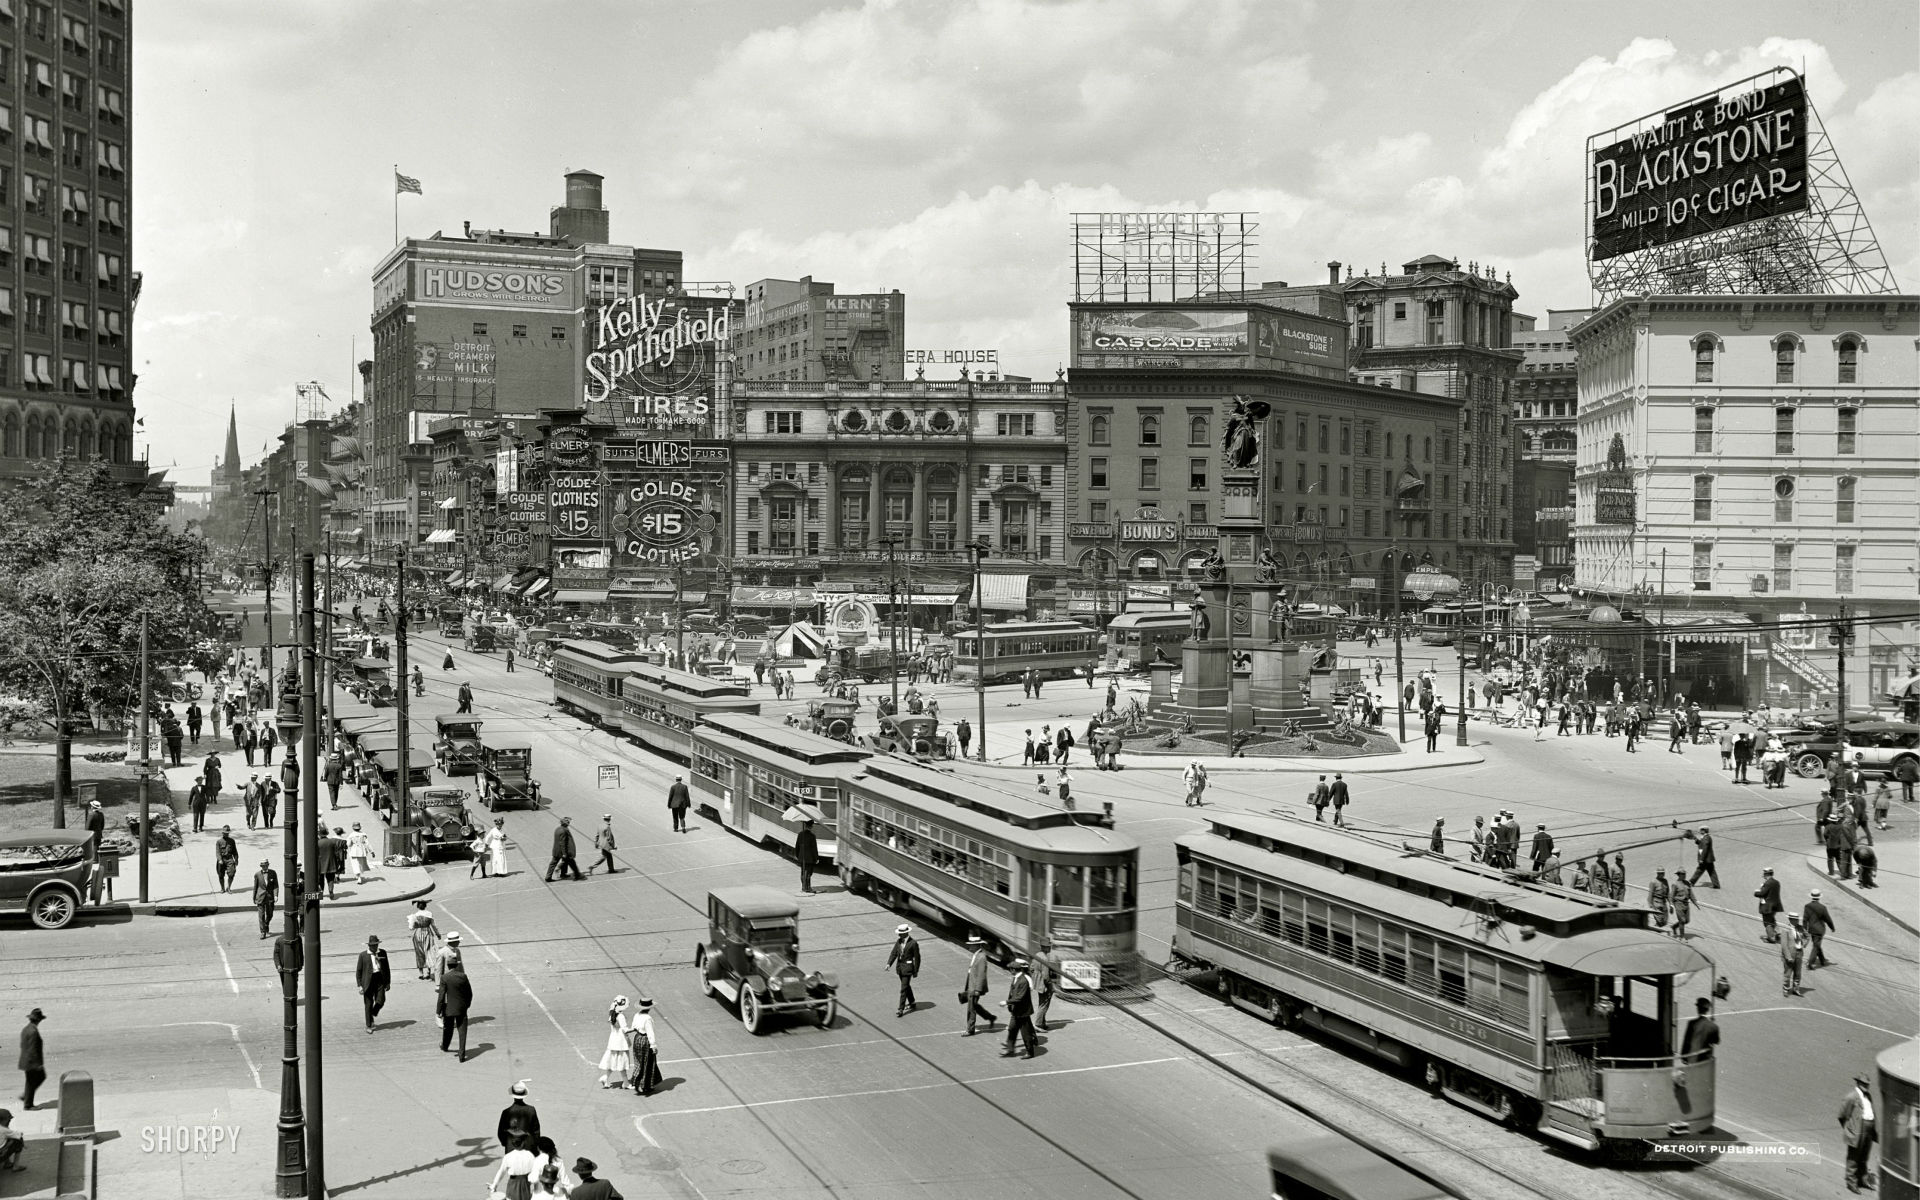 Detroit's Campus Martius - Looking north up Woodward Ave by Shorpy